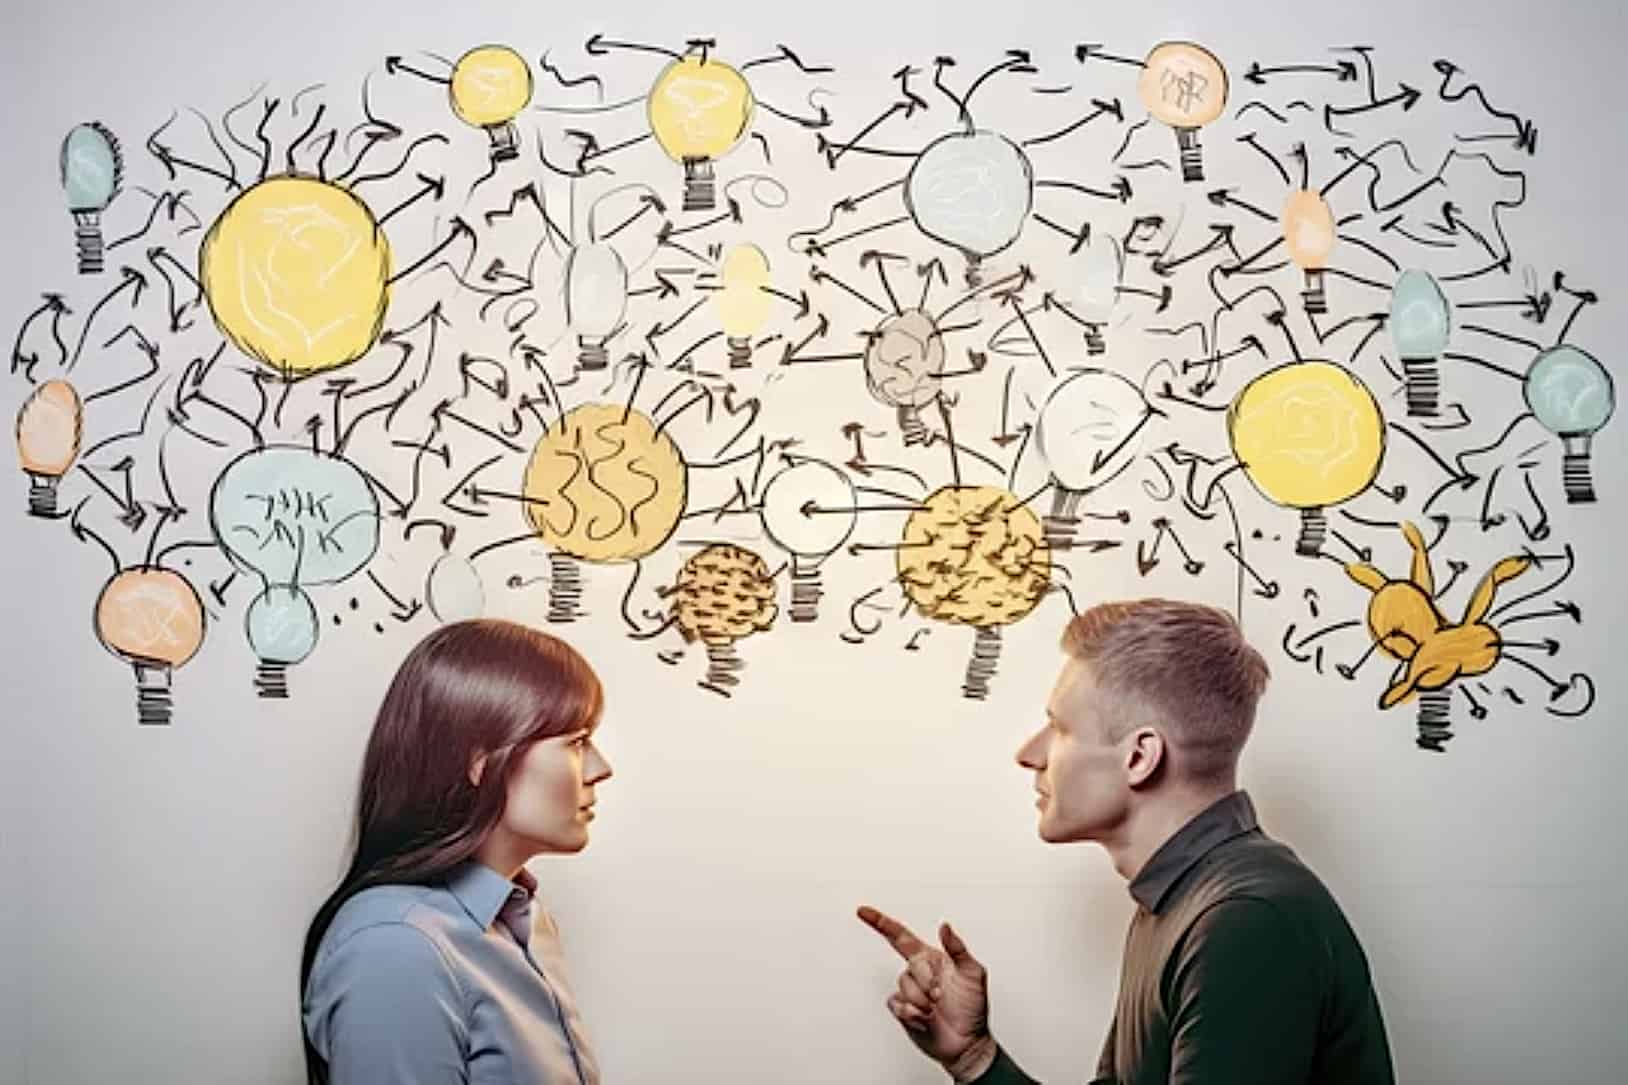 A man points his finger at a woman while speaking to her in front of a wall covered with drawings of light bulbs connected with chaotic arrows and lines, representative of "forcing" ideas upon someone.